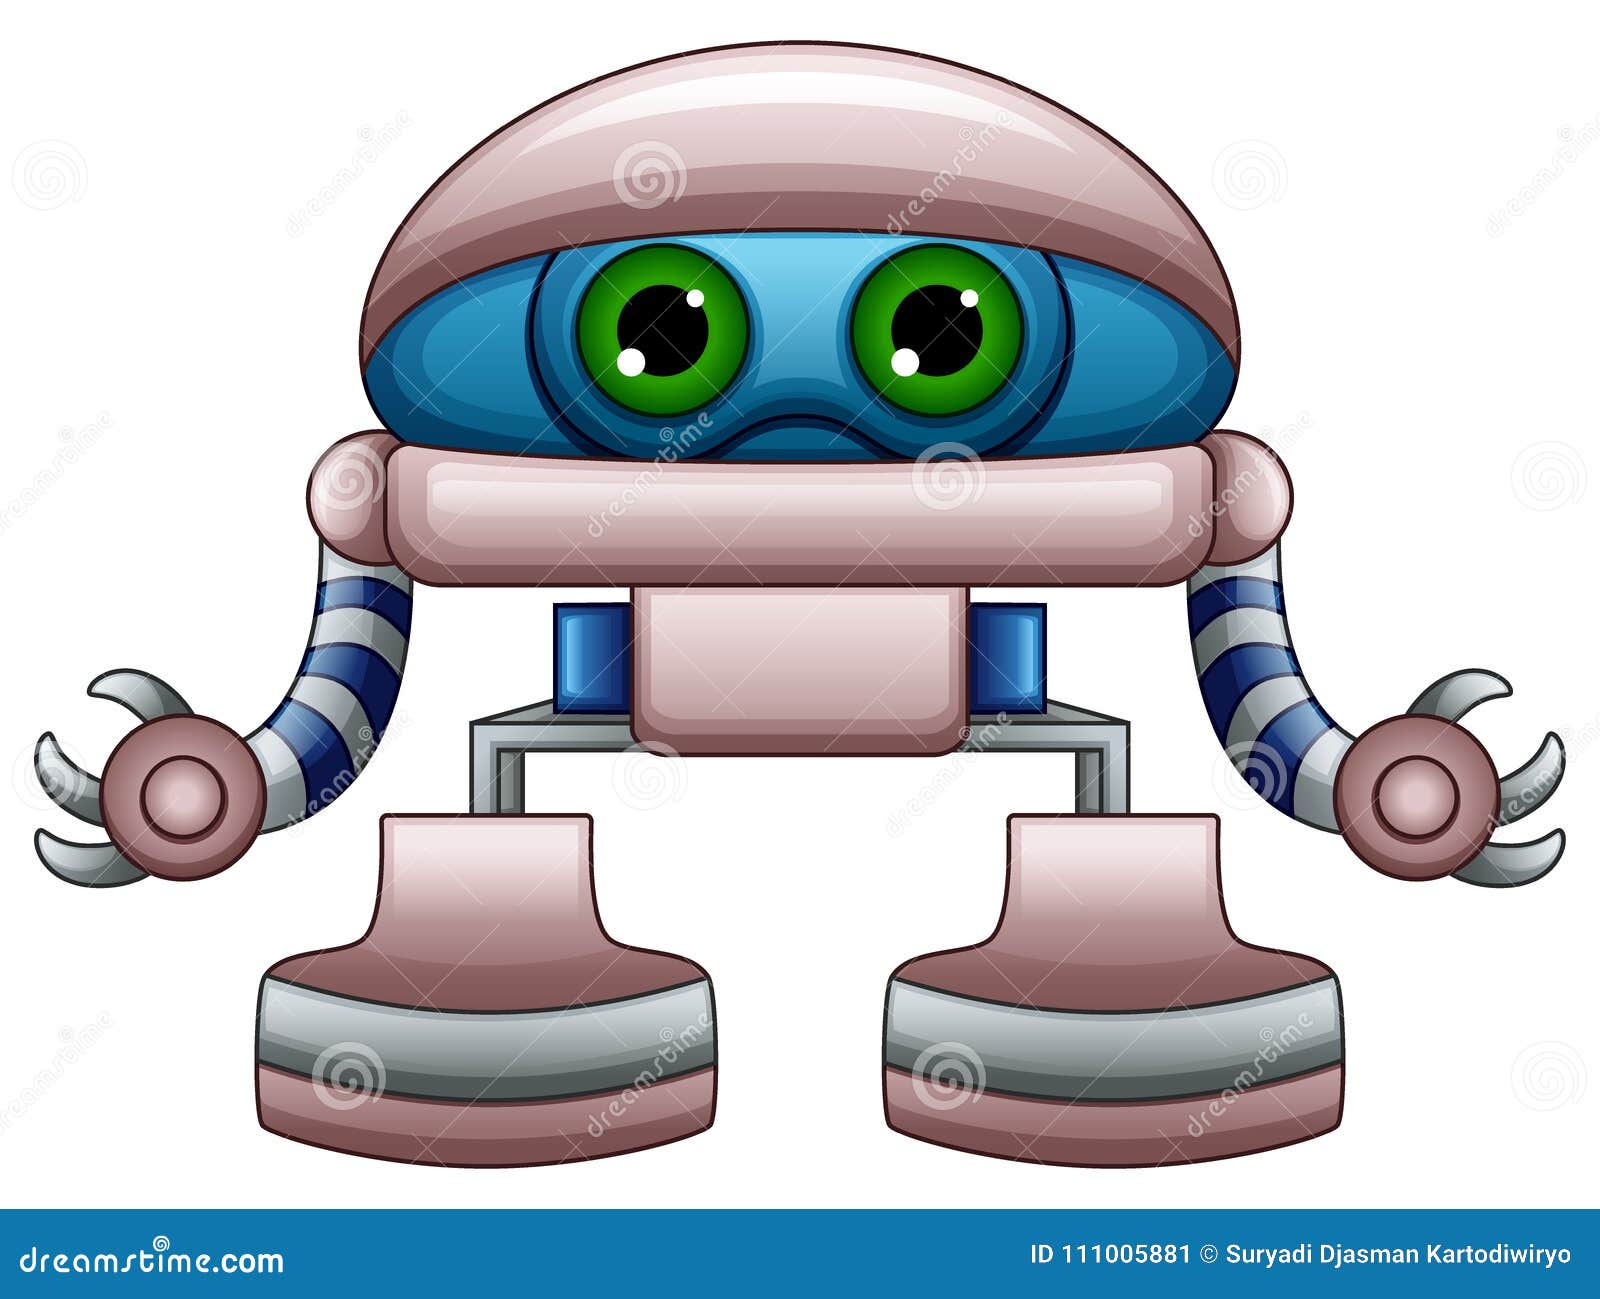 Cute Robot Cartoon with Green Eyes Isolated on White Background Stock  Vector - Illustration of artificial, computer: 111005881